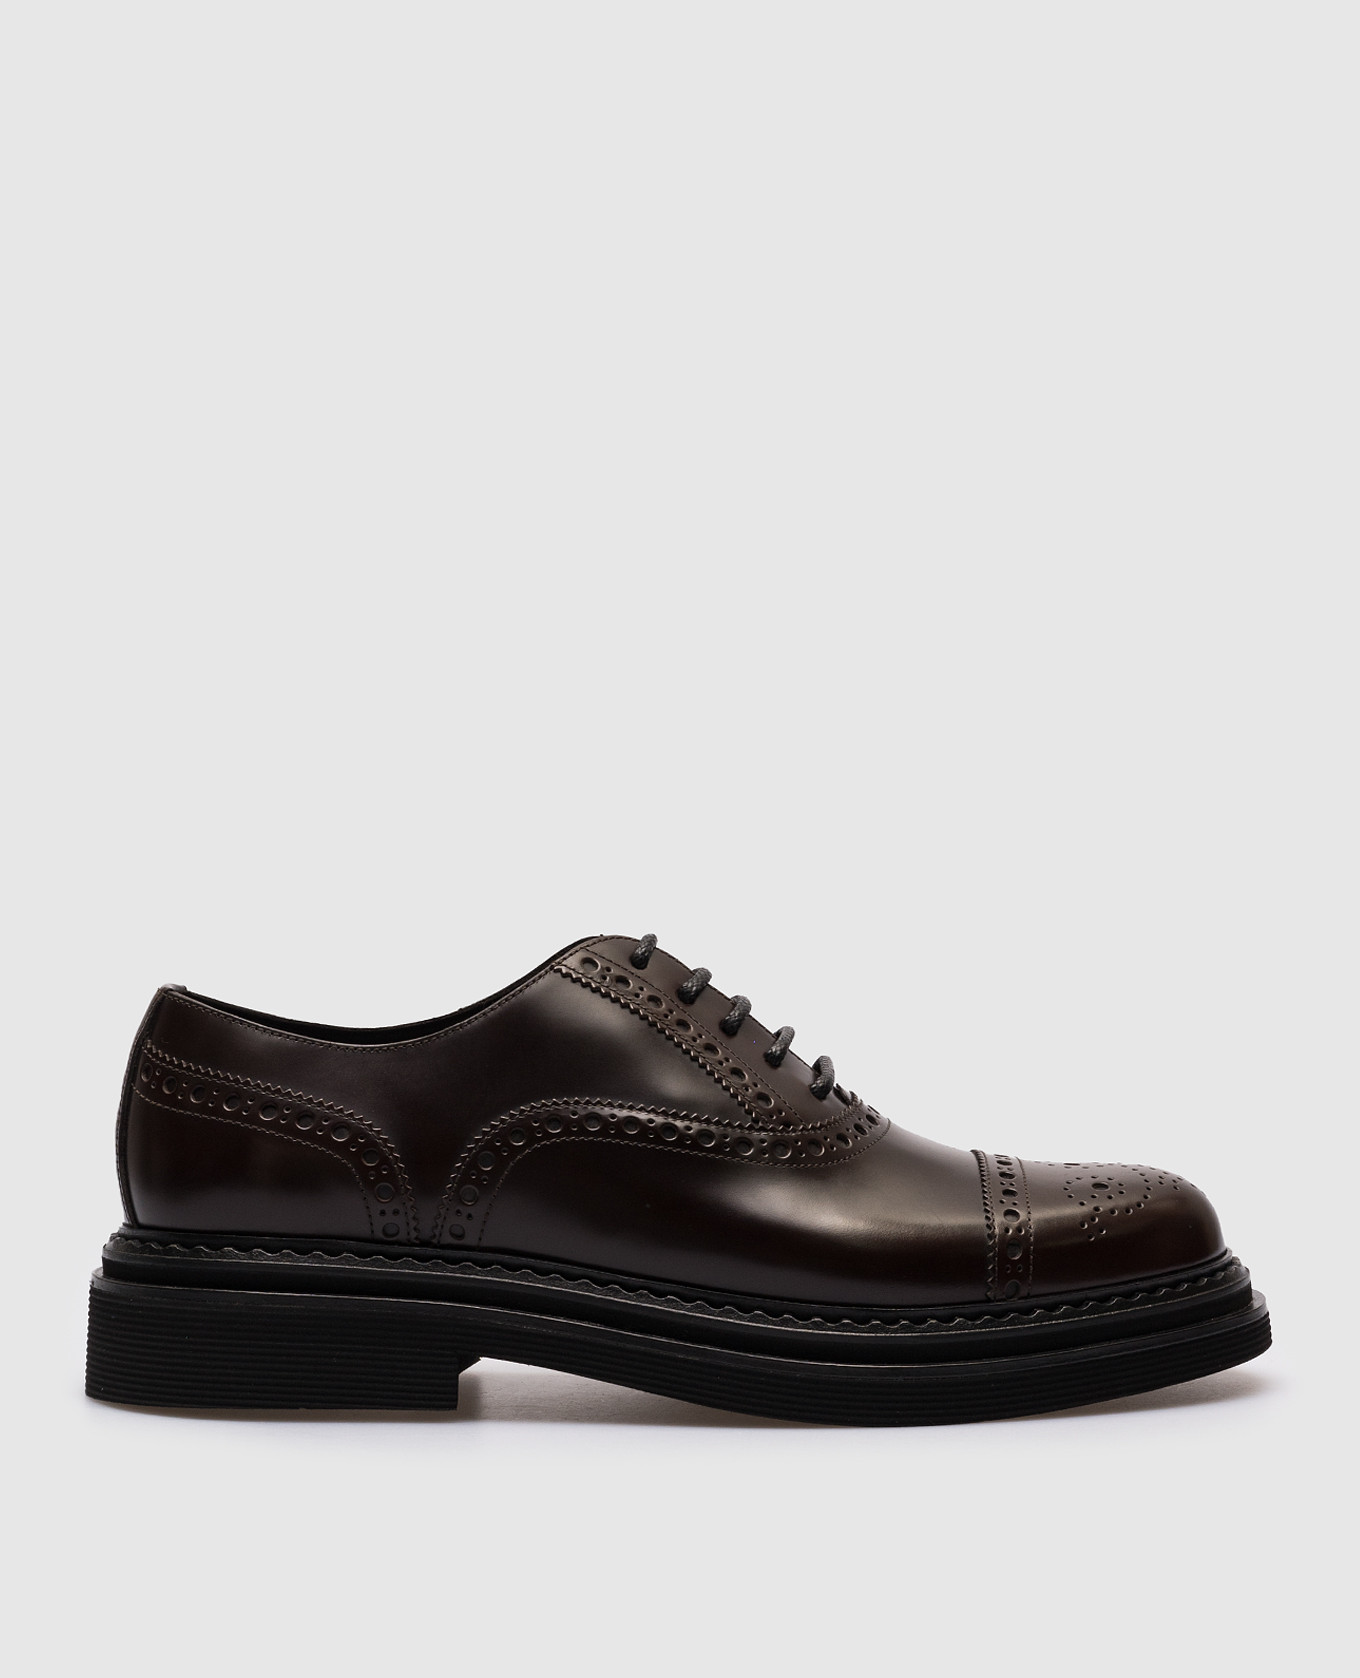 Brown leather oxfords